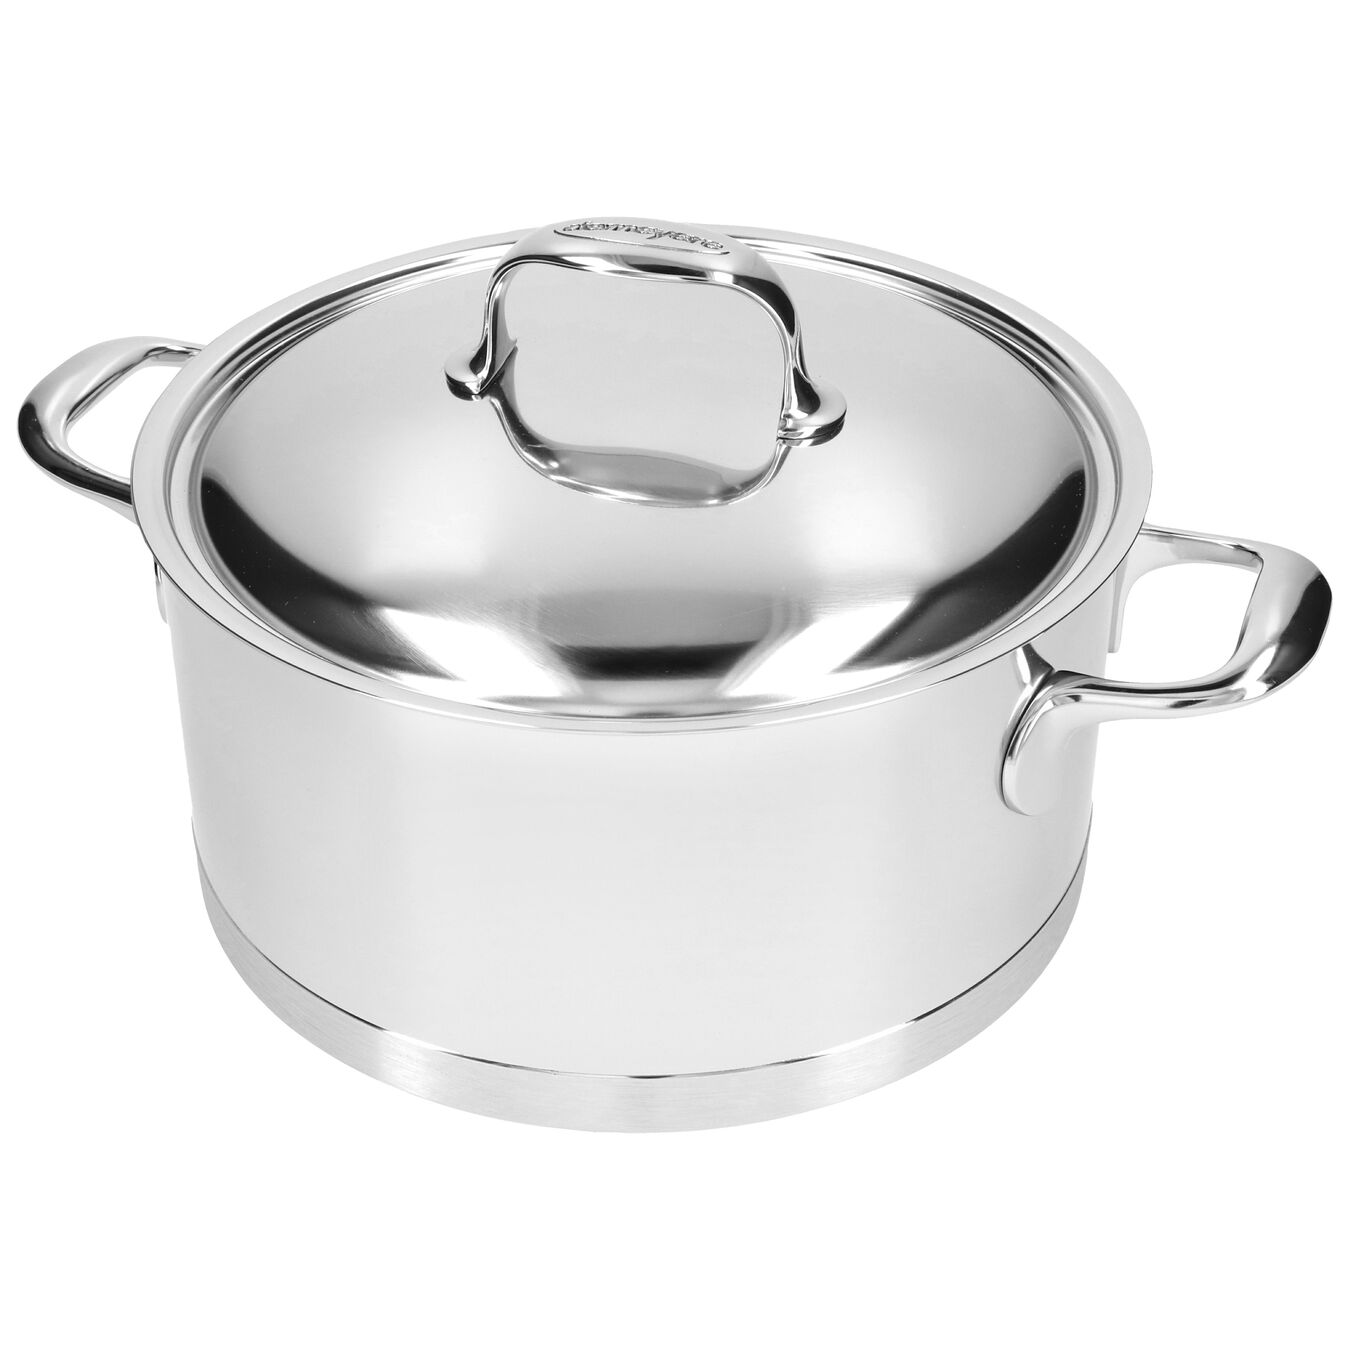 5.5 qt, 18/10 Stainless Steel, Dutch Oven with lid,,large 4